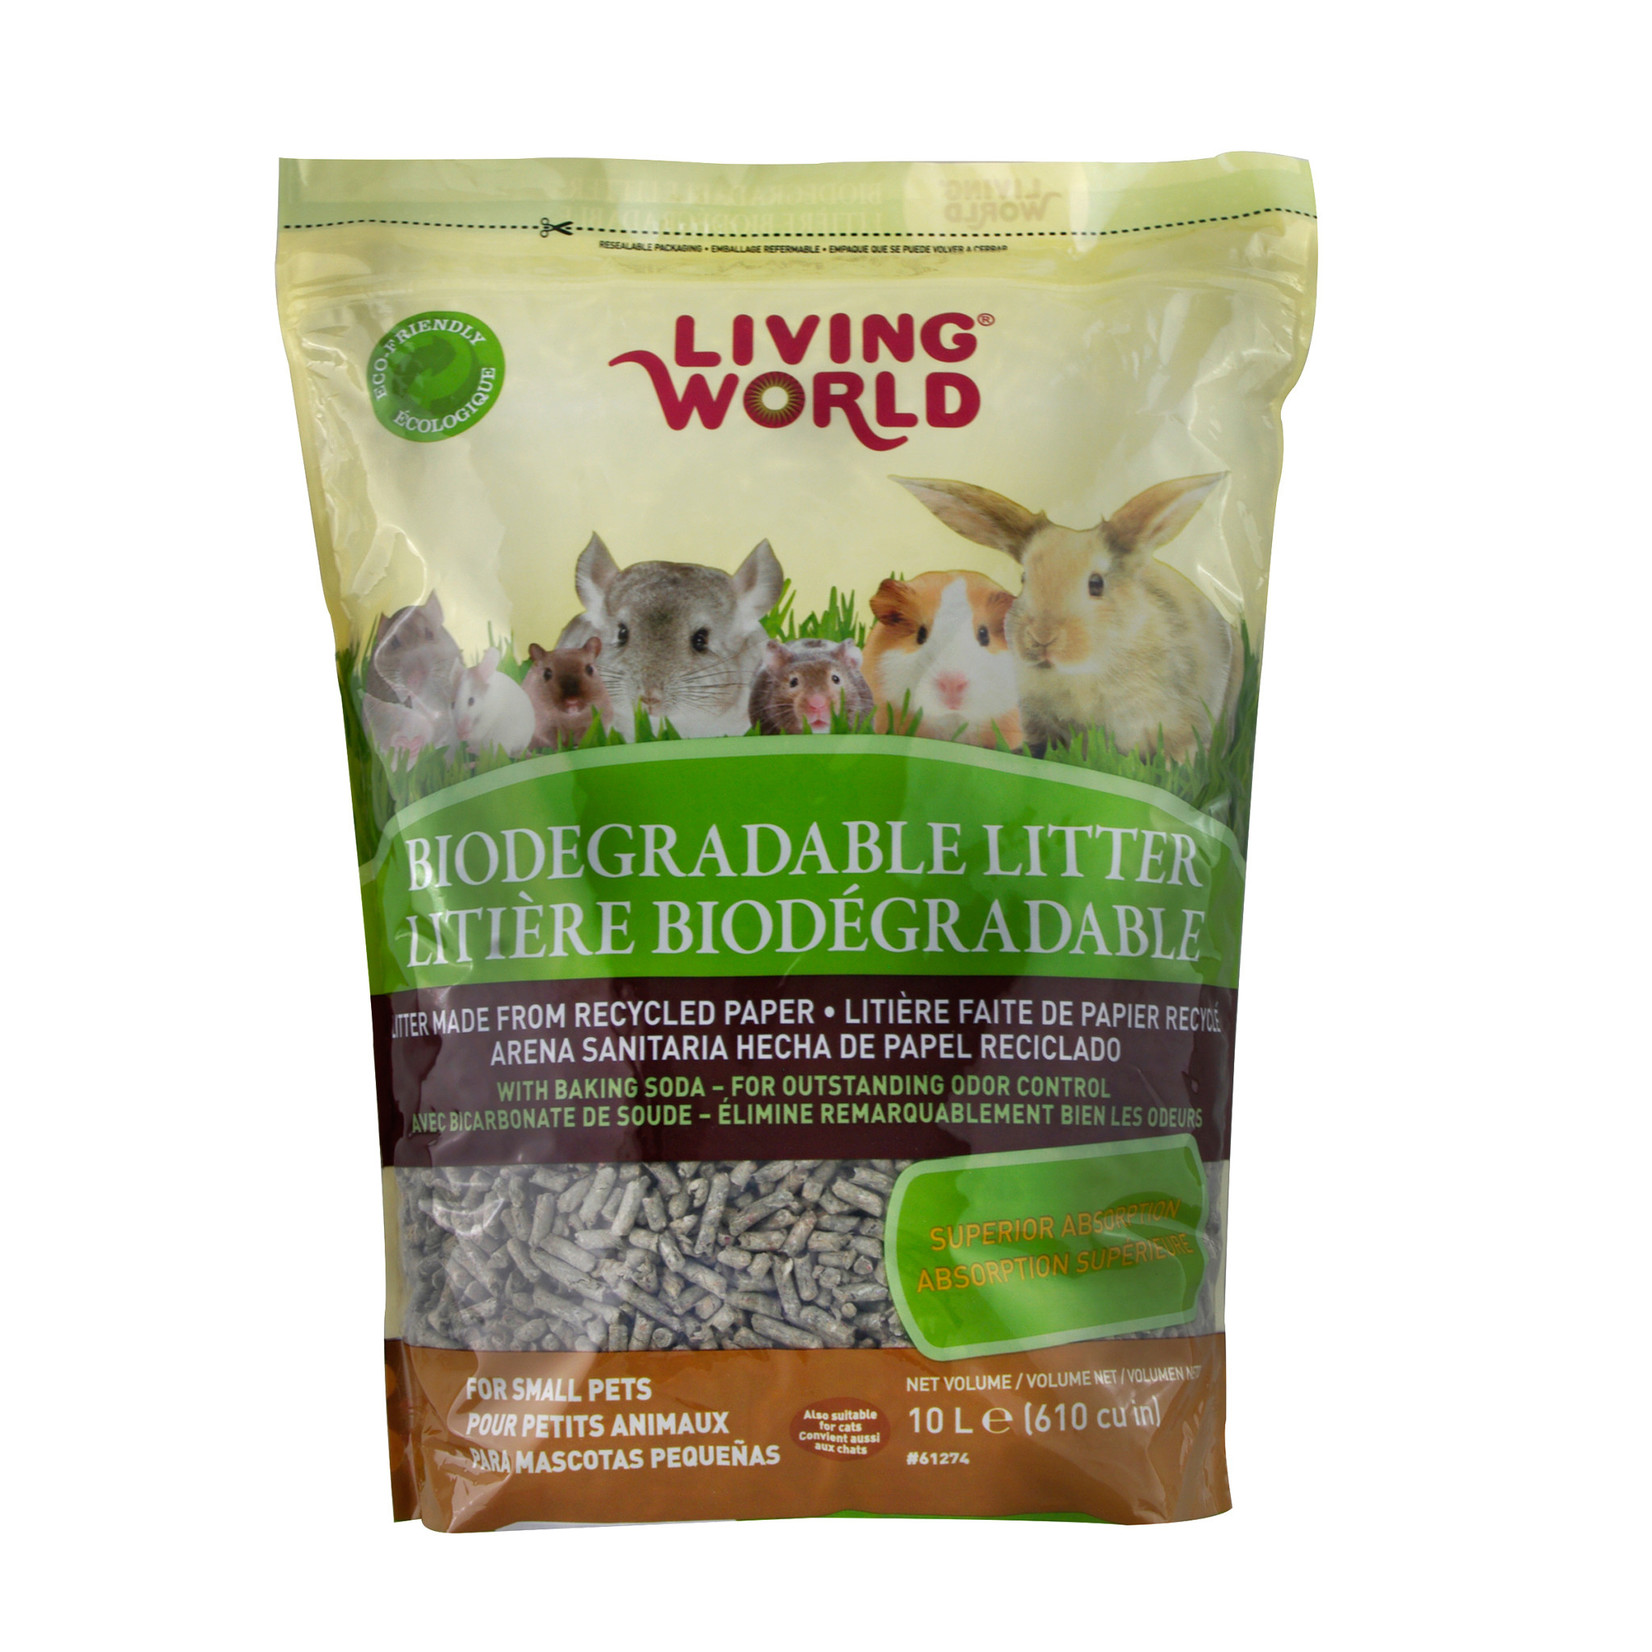 LIVING WORLD Living World Biodegradable Litter for Small Animals - 10 L (610 cu in)